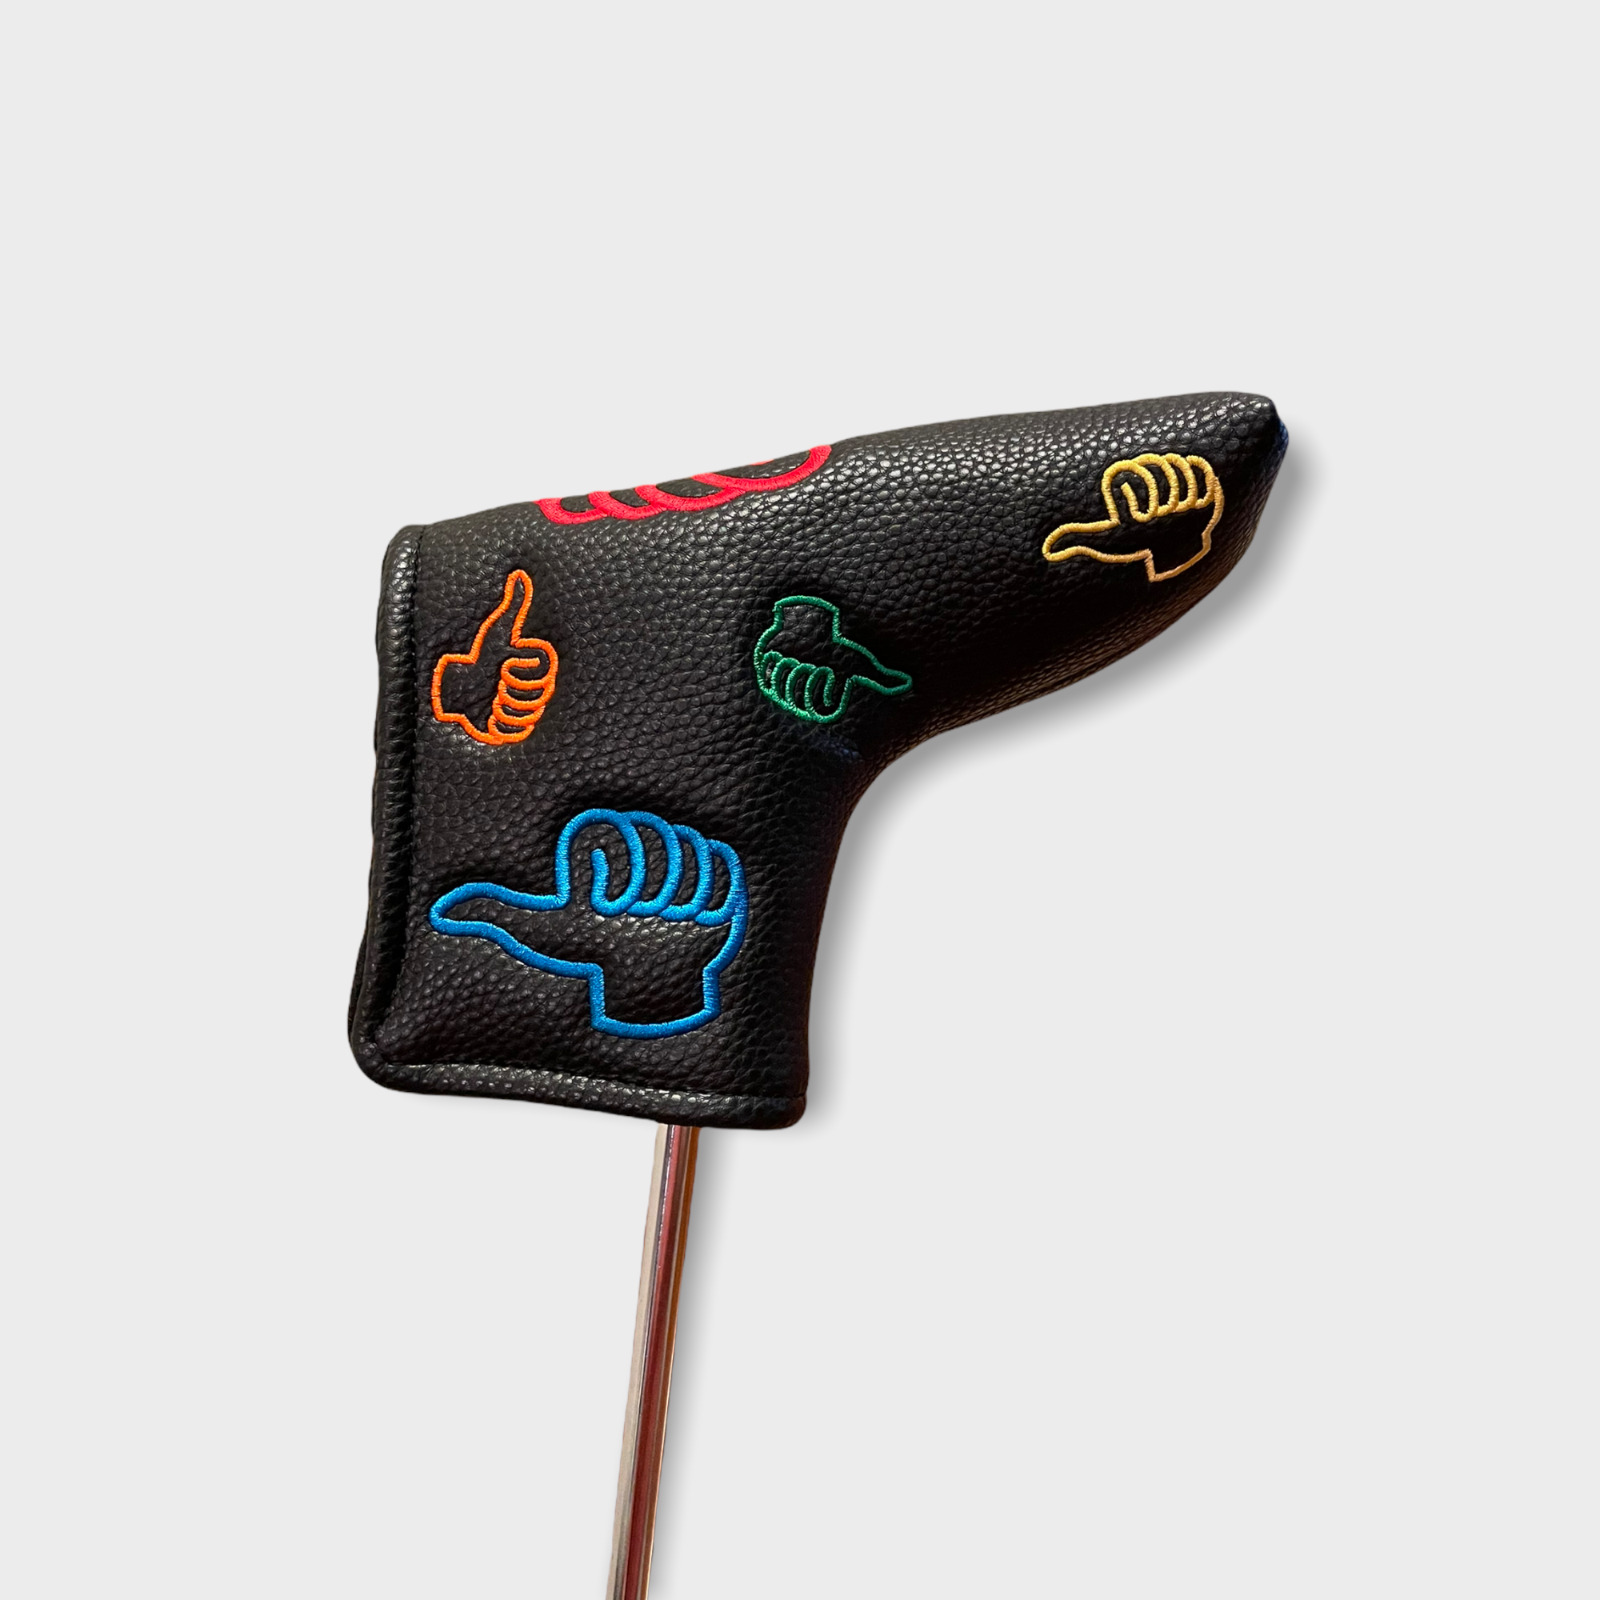 Phill Special Thumbs Up Lucky Putter Cover